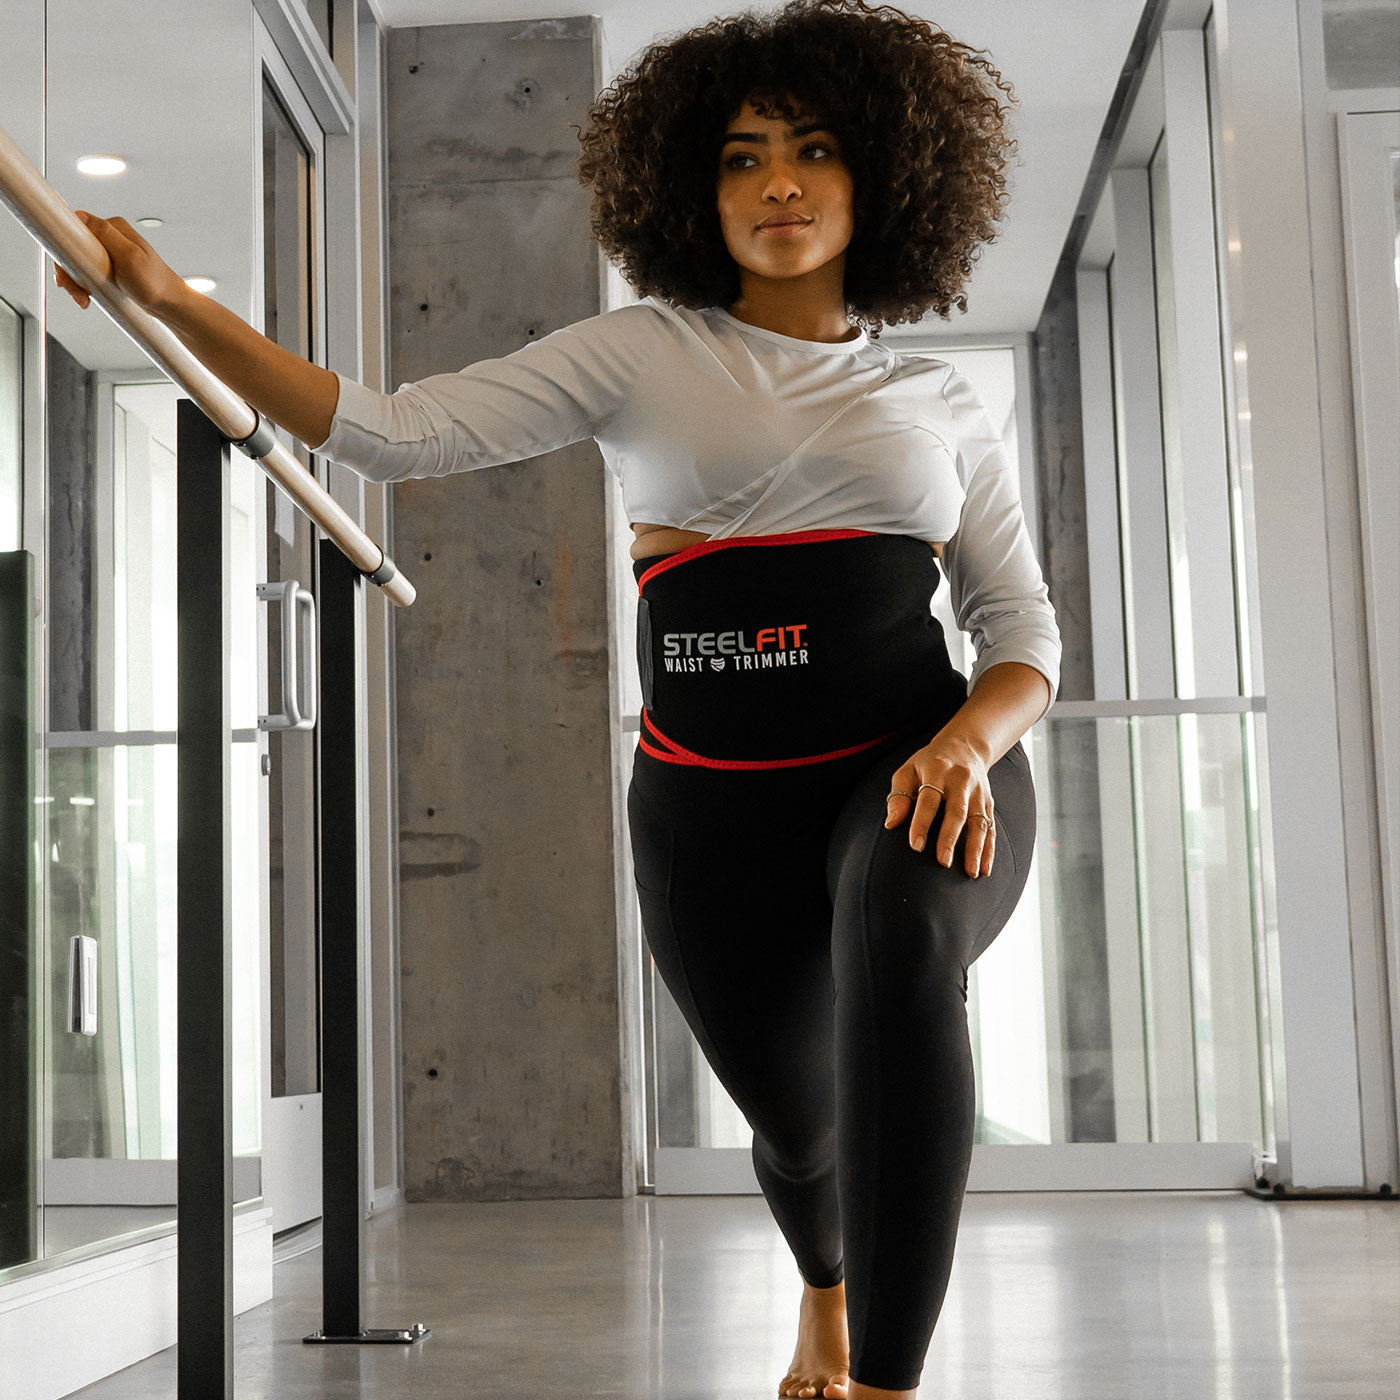 Pretty curly haired woman exercising with a SteelFit adjustable waist trimmer